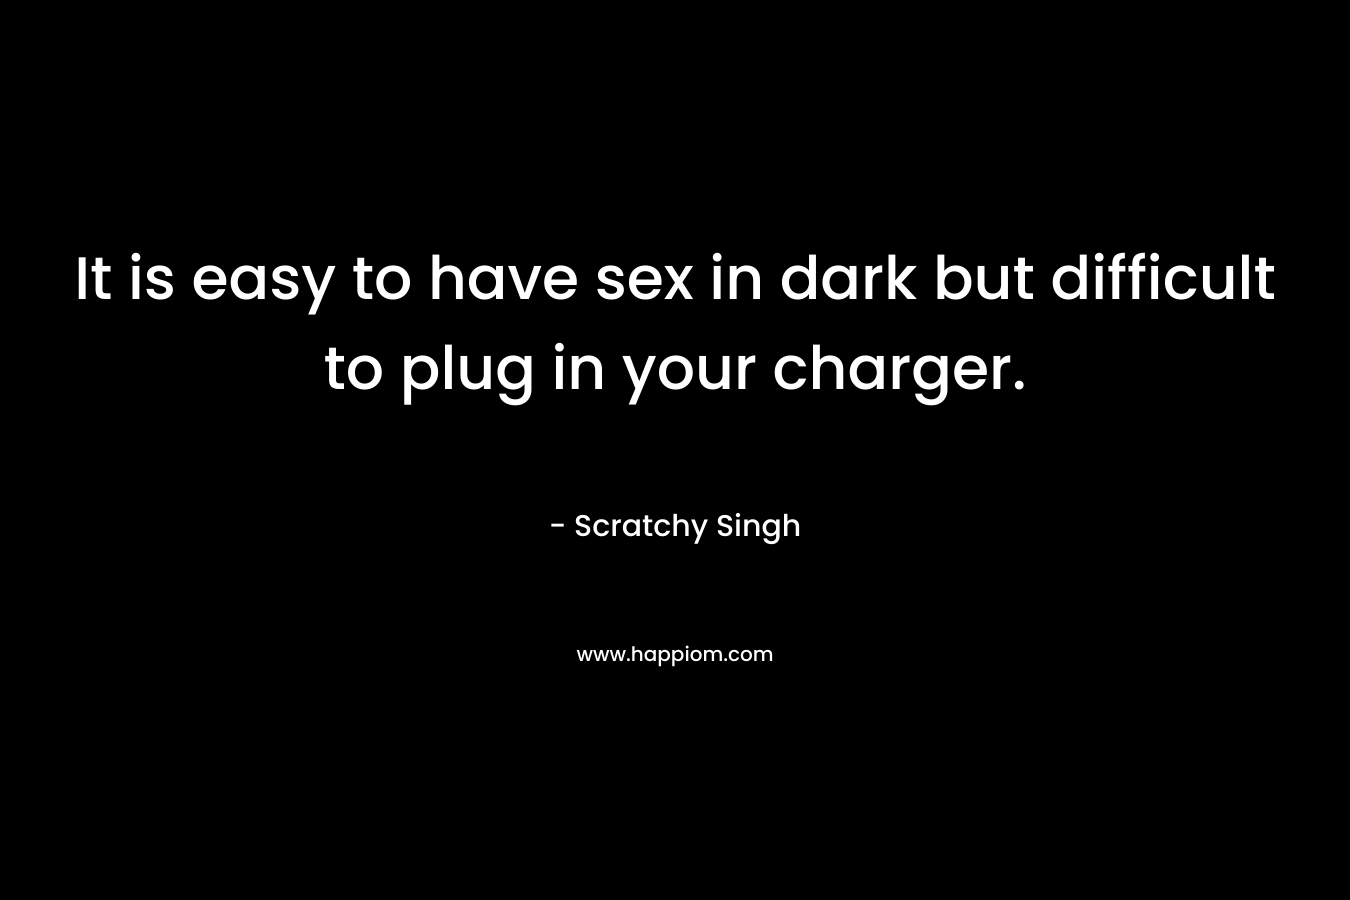 It is easy to have sex in dark but difficult to plug in your charger.